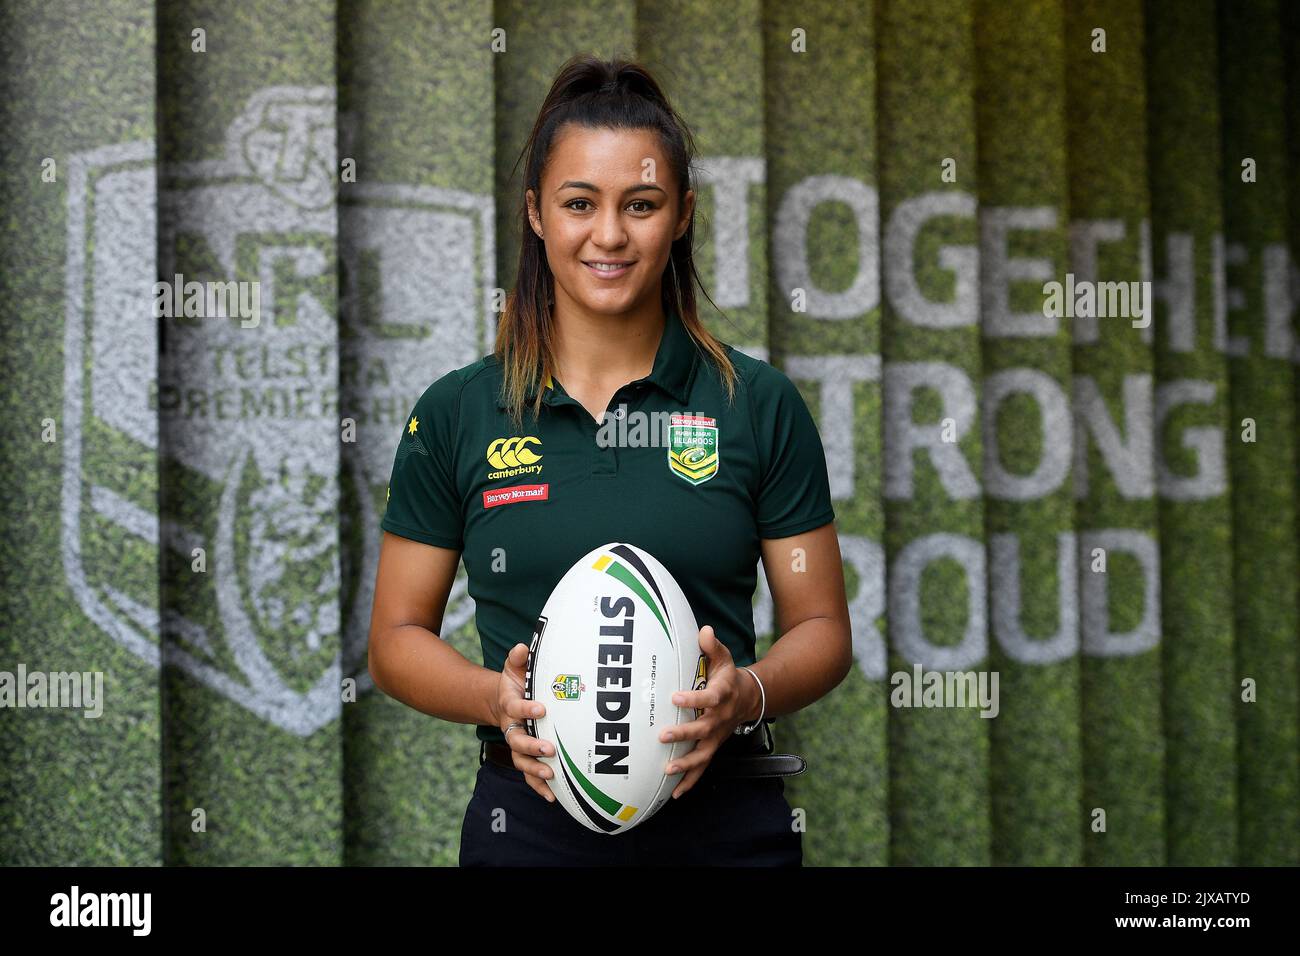 Australian Jillaroos rugby league player Corban McGregor poses for a photograph at the announcement of the NRL Womens Program in Sydney, Wednesday, December 6, 2017